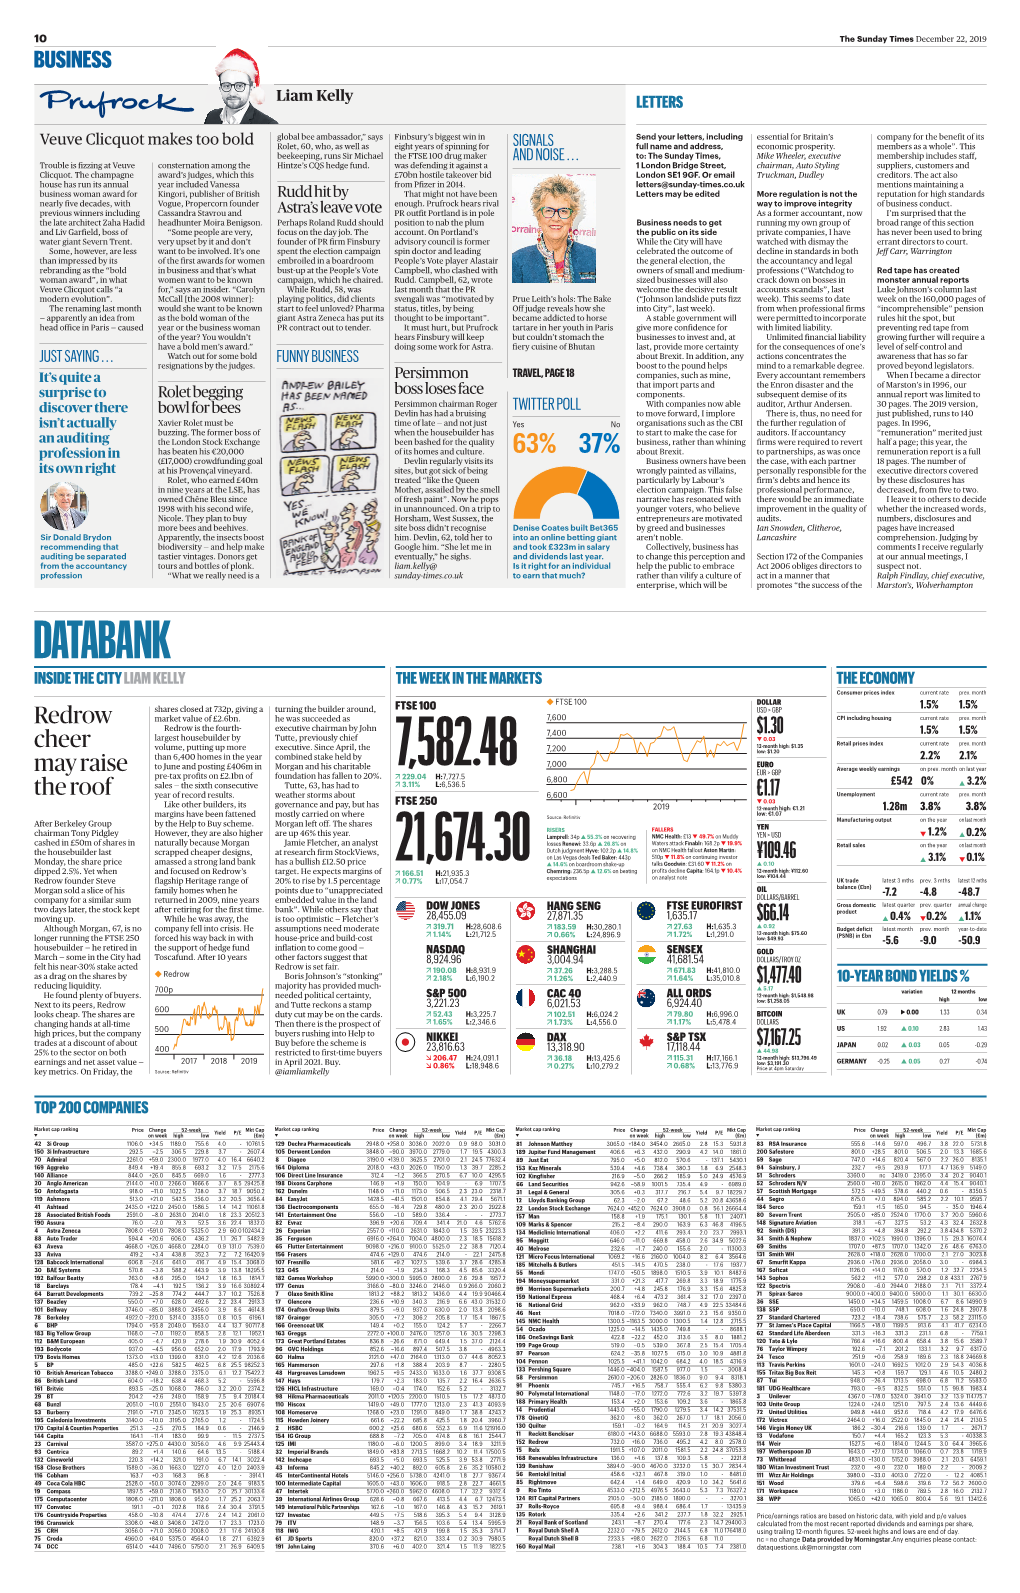 DATABANK INSIDE the CITY LIAM KELLY the WEEK in the MARKETS the ECONOMY Consumer Prices Index Current Rate Prev